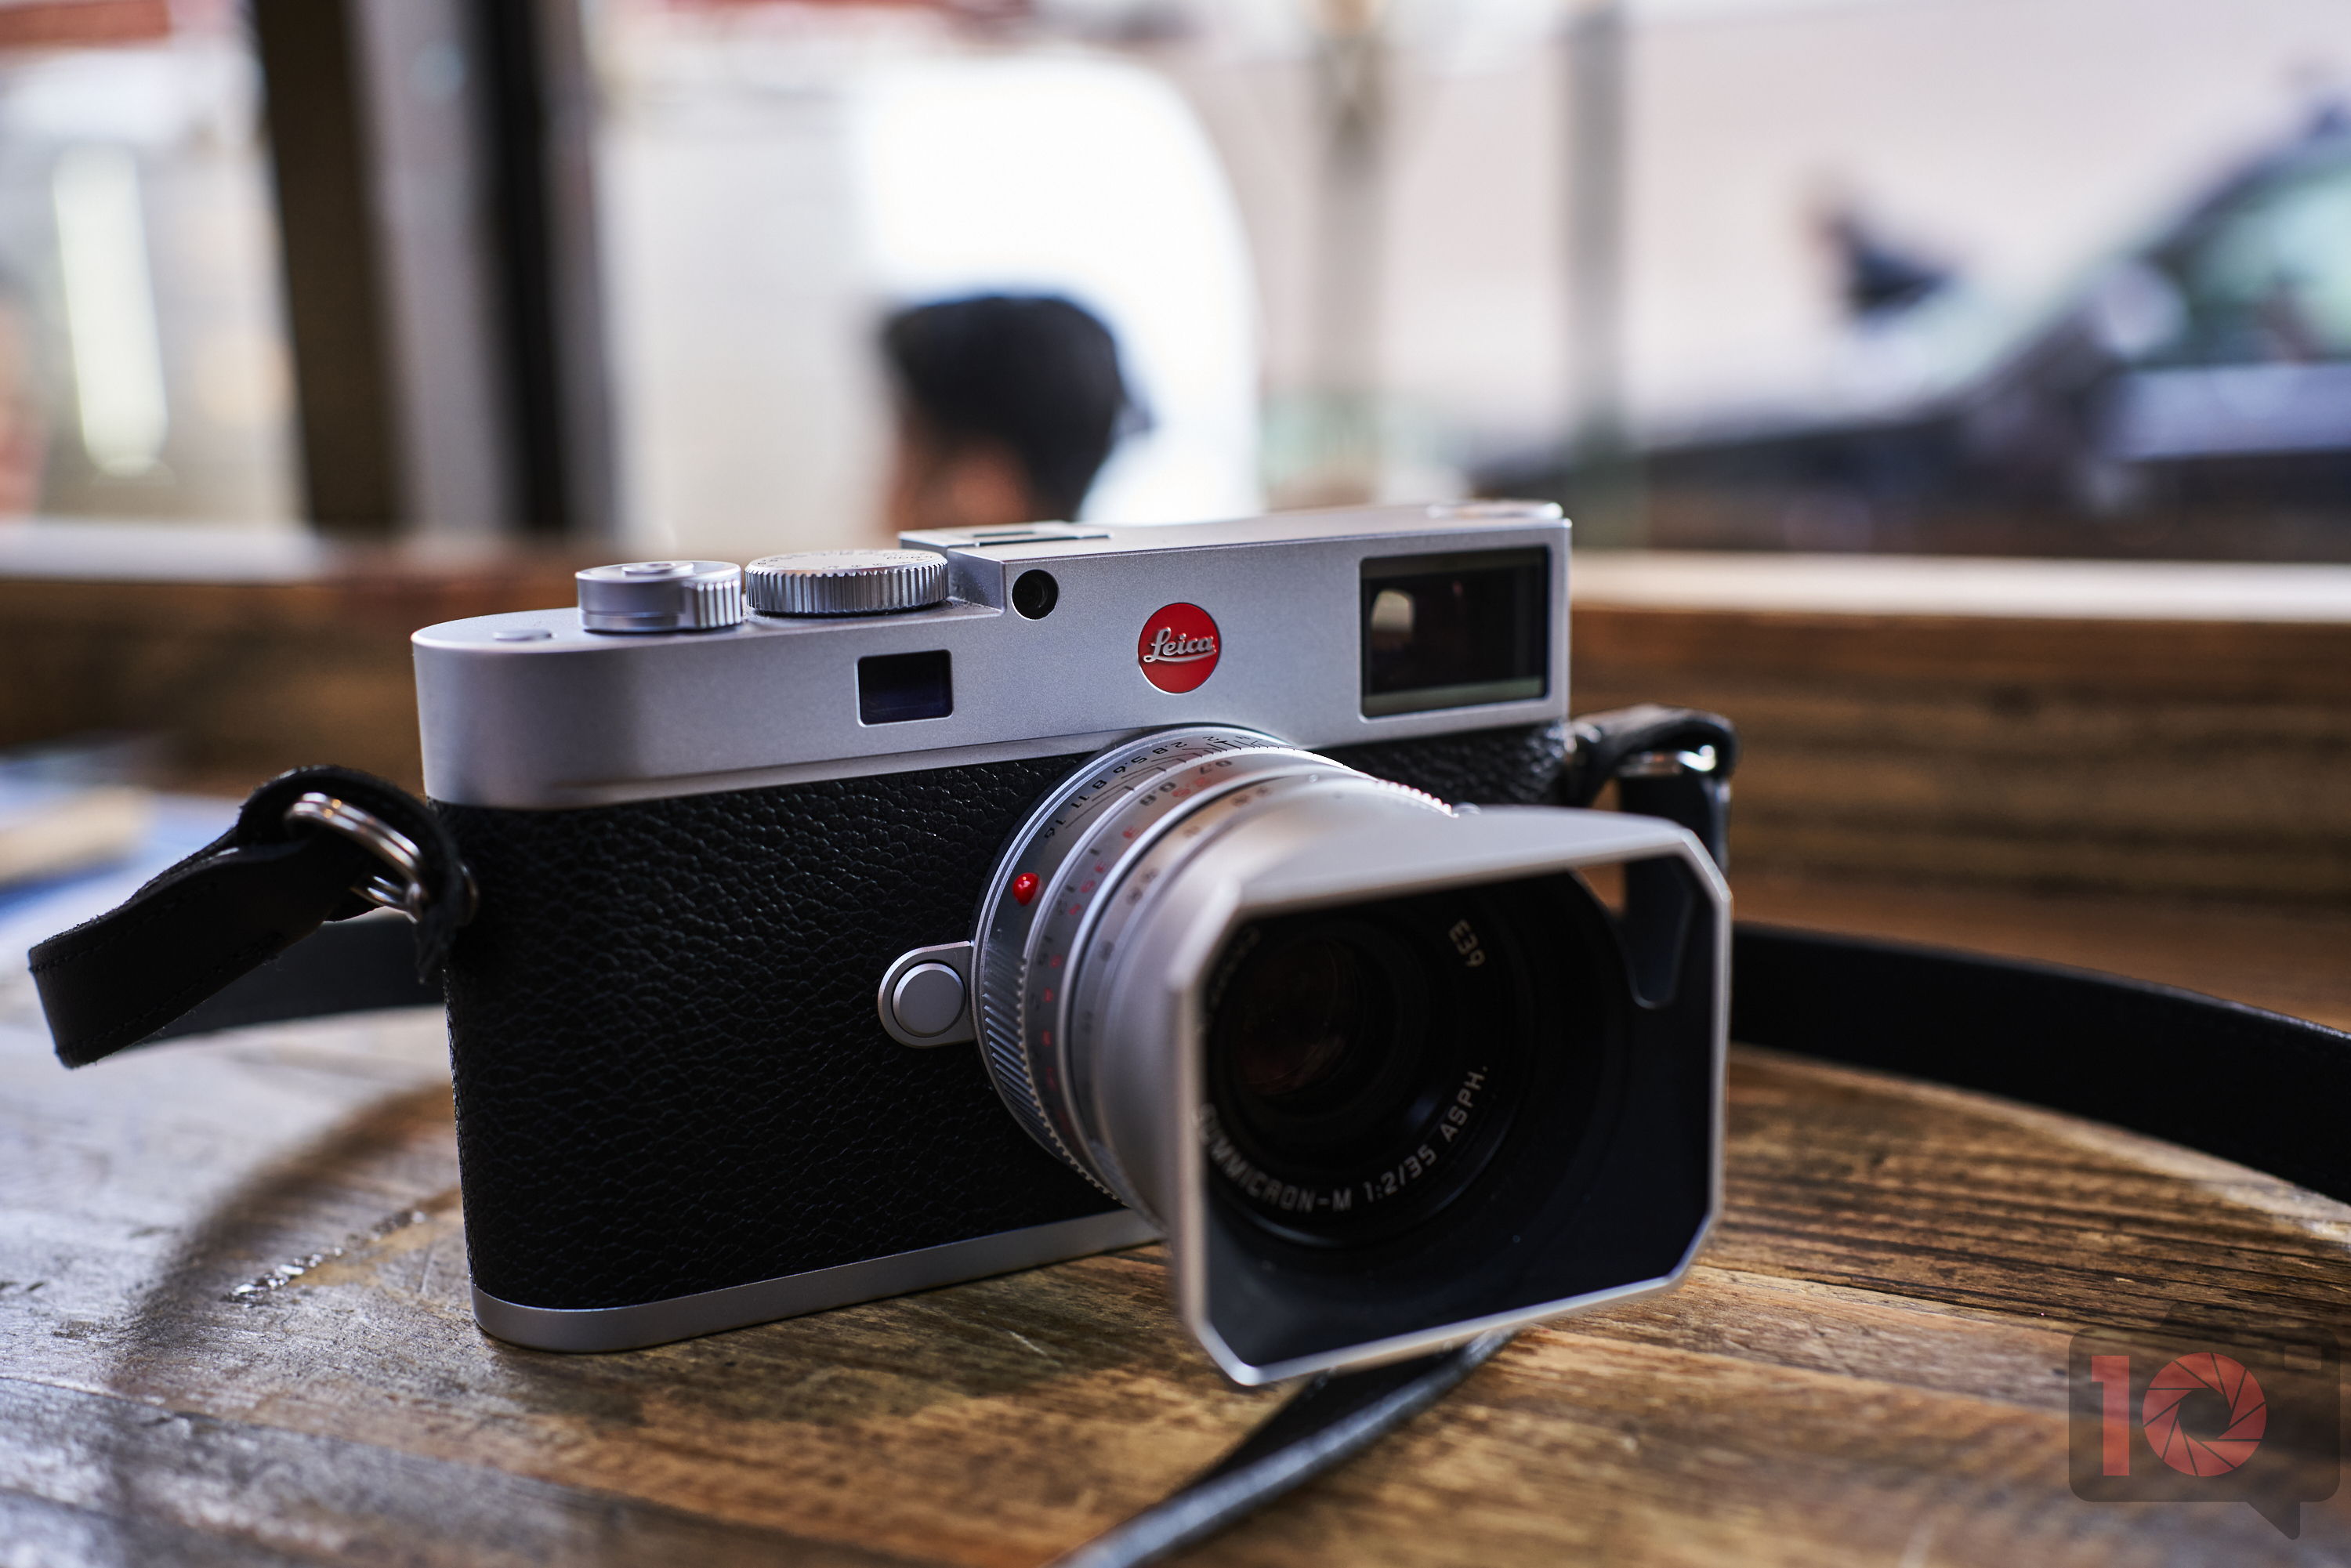 Chris Gampat The Phoblographer Leica M11 review images product photos 3.51-50s400